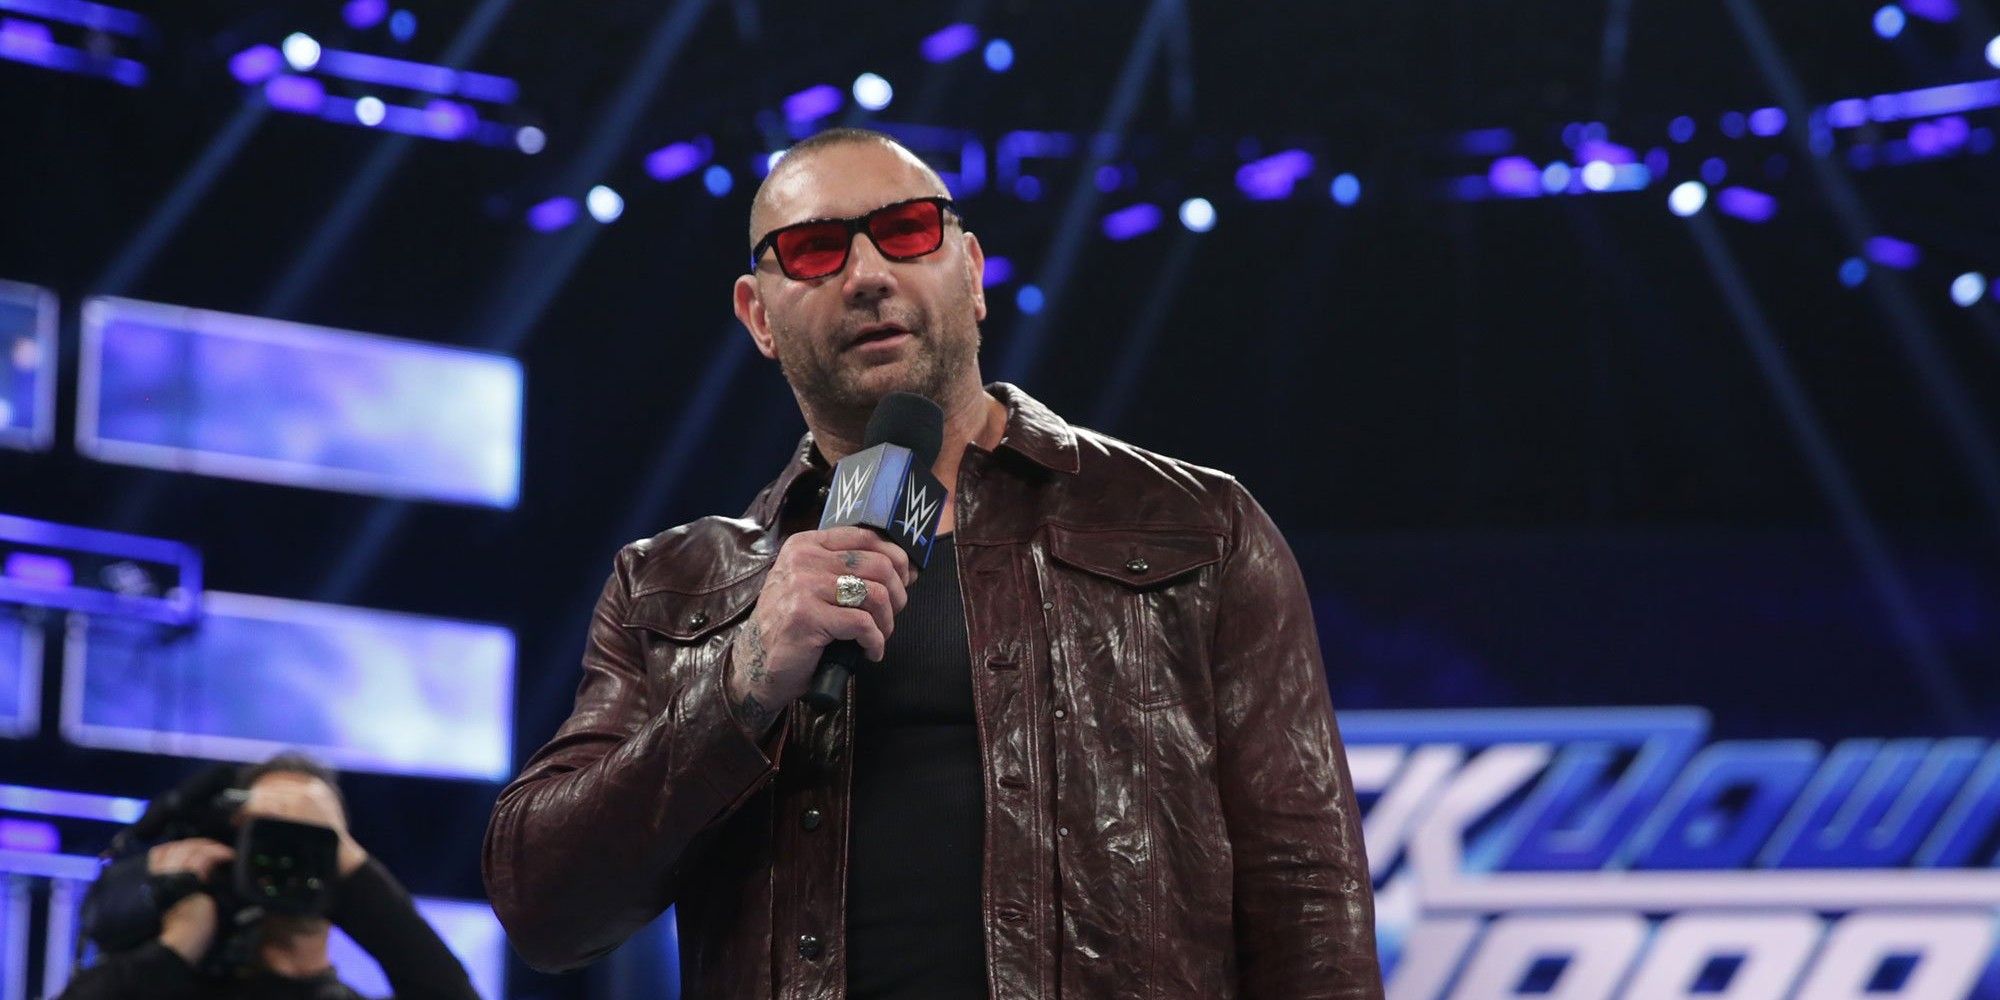 Dave Bautista Reacts To WWE Video Of Him Breakdancing 17 Years Ago